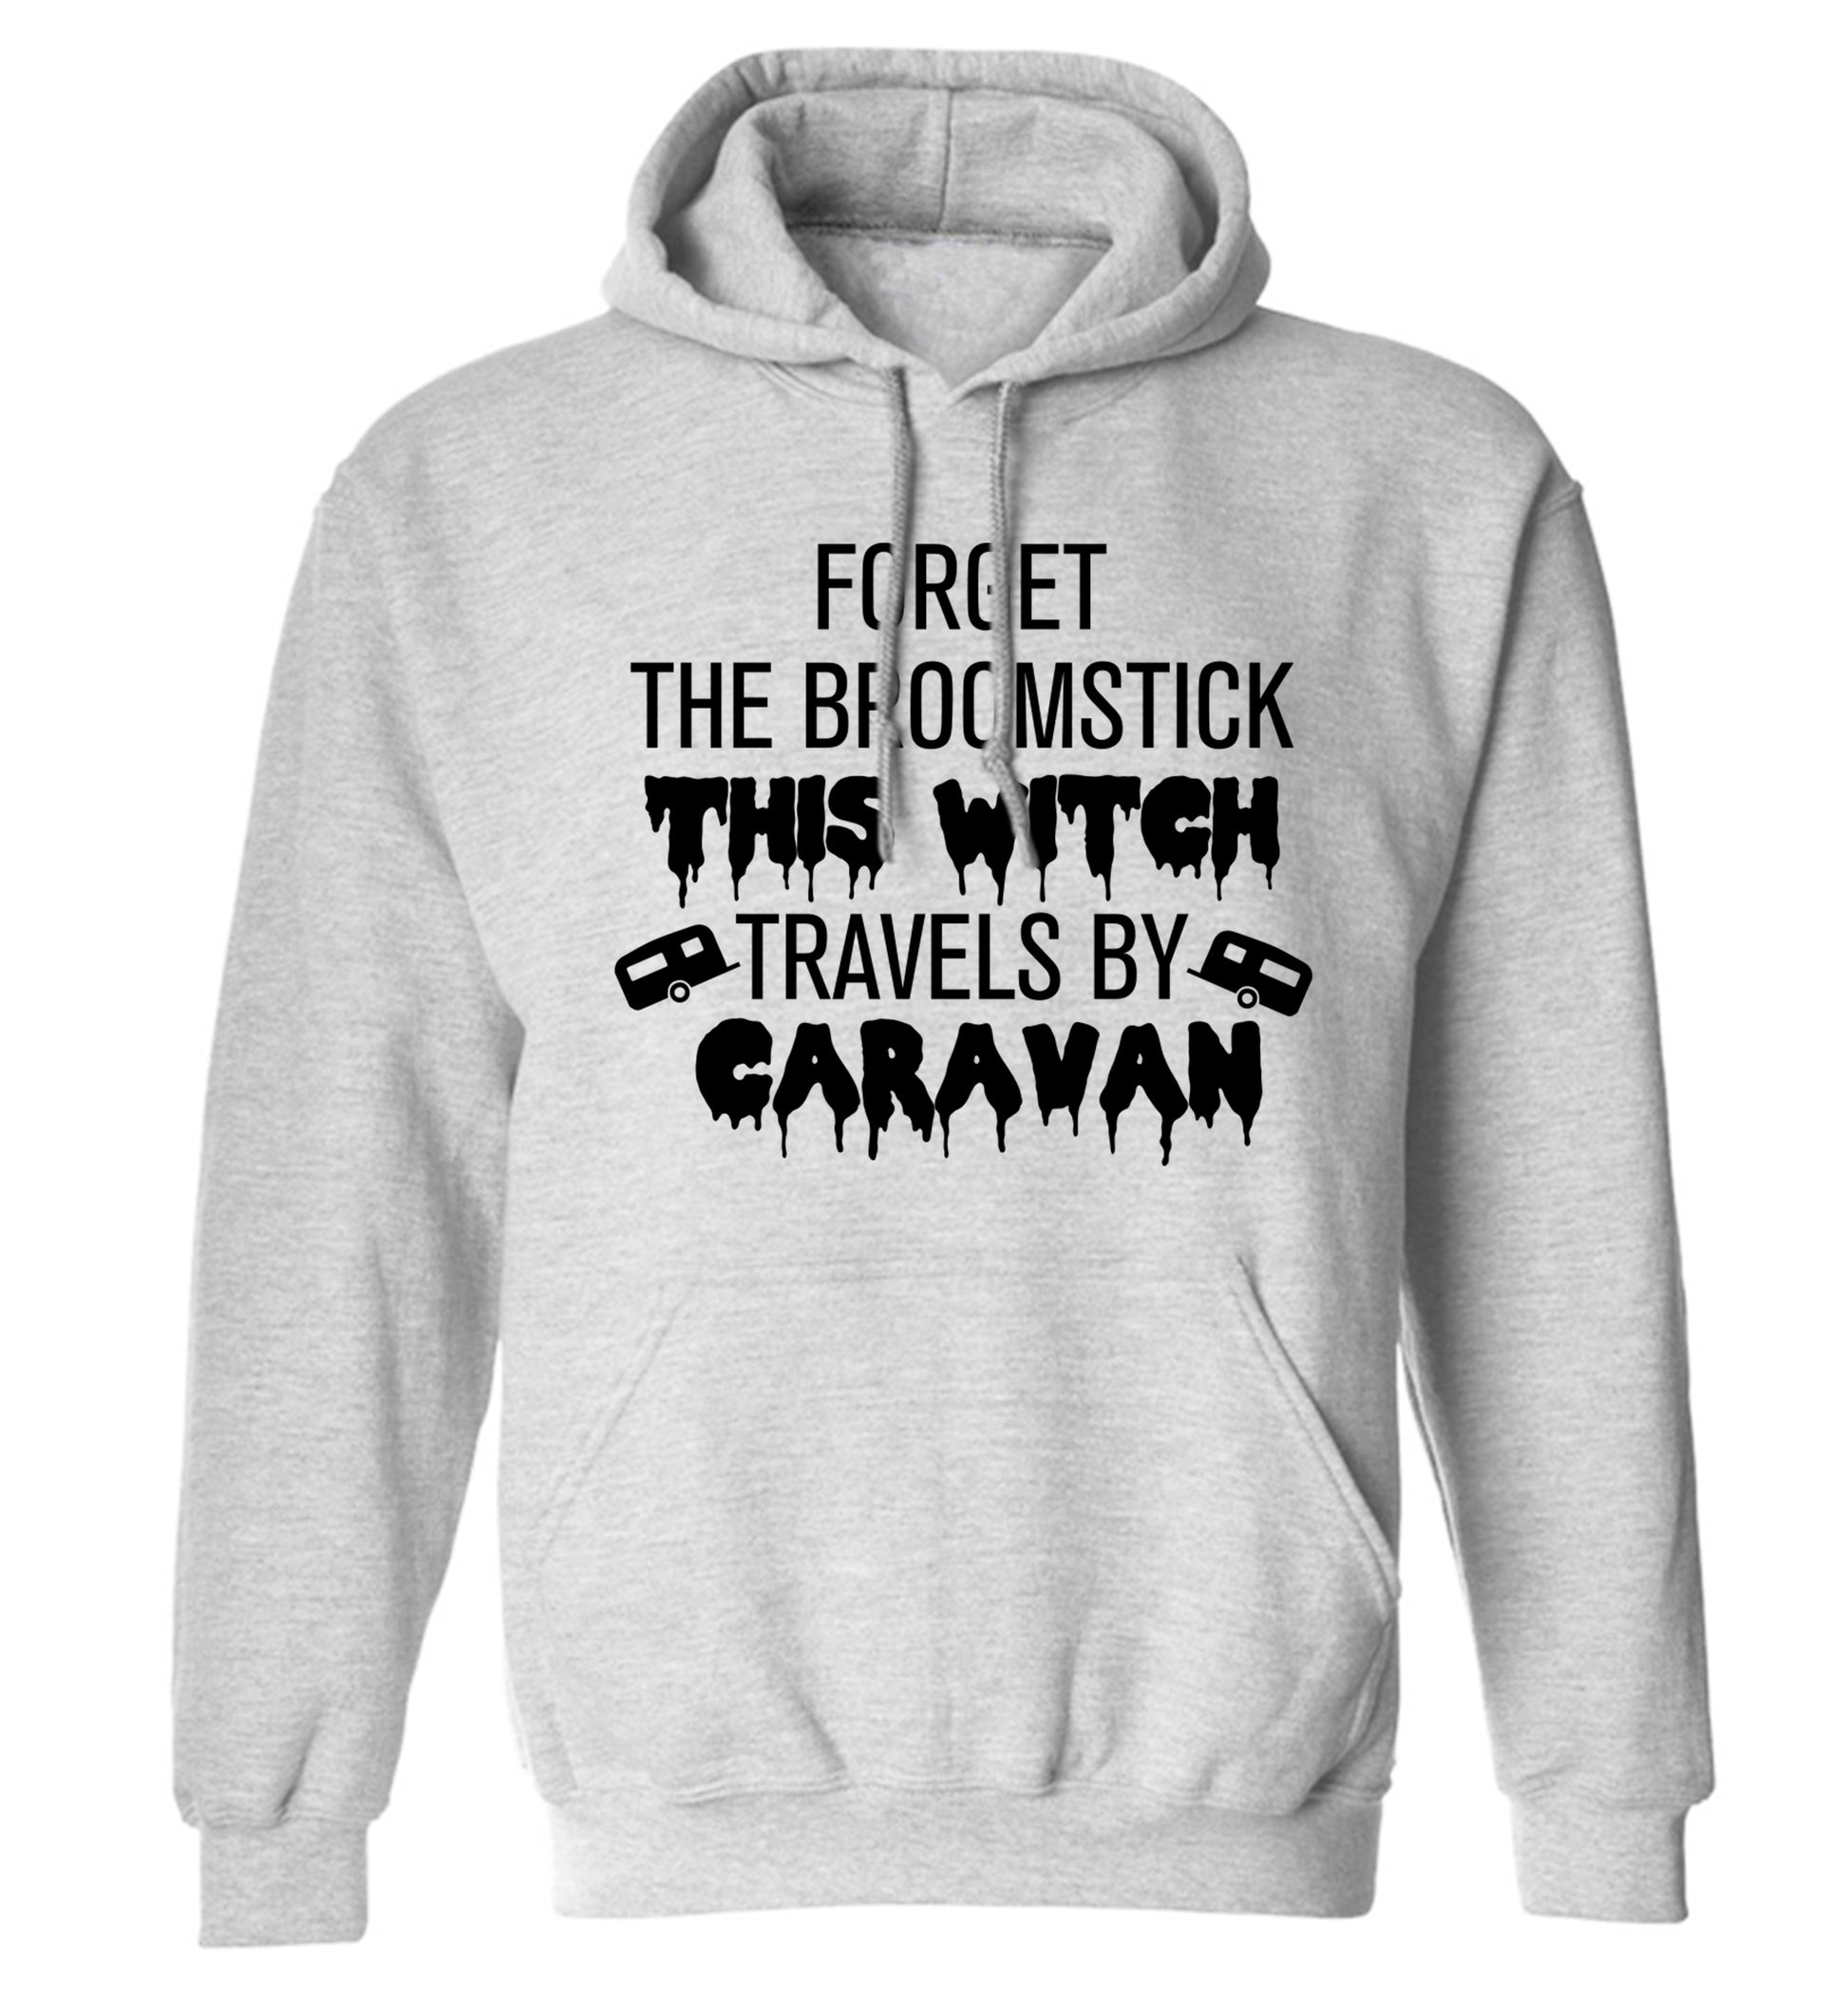 Forget the broomstick this witch travels by caravan adults unisexgrey hoodie 2XL